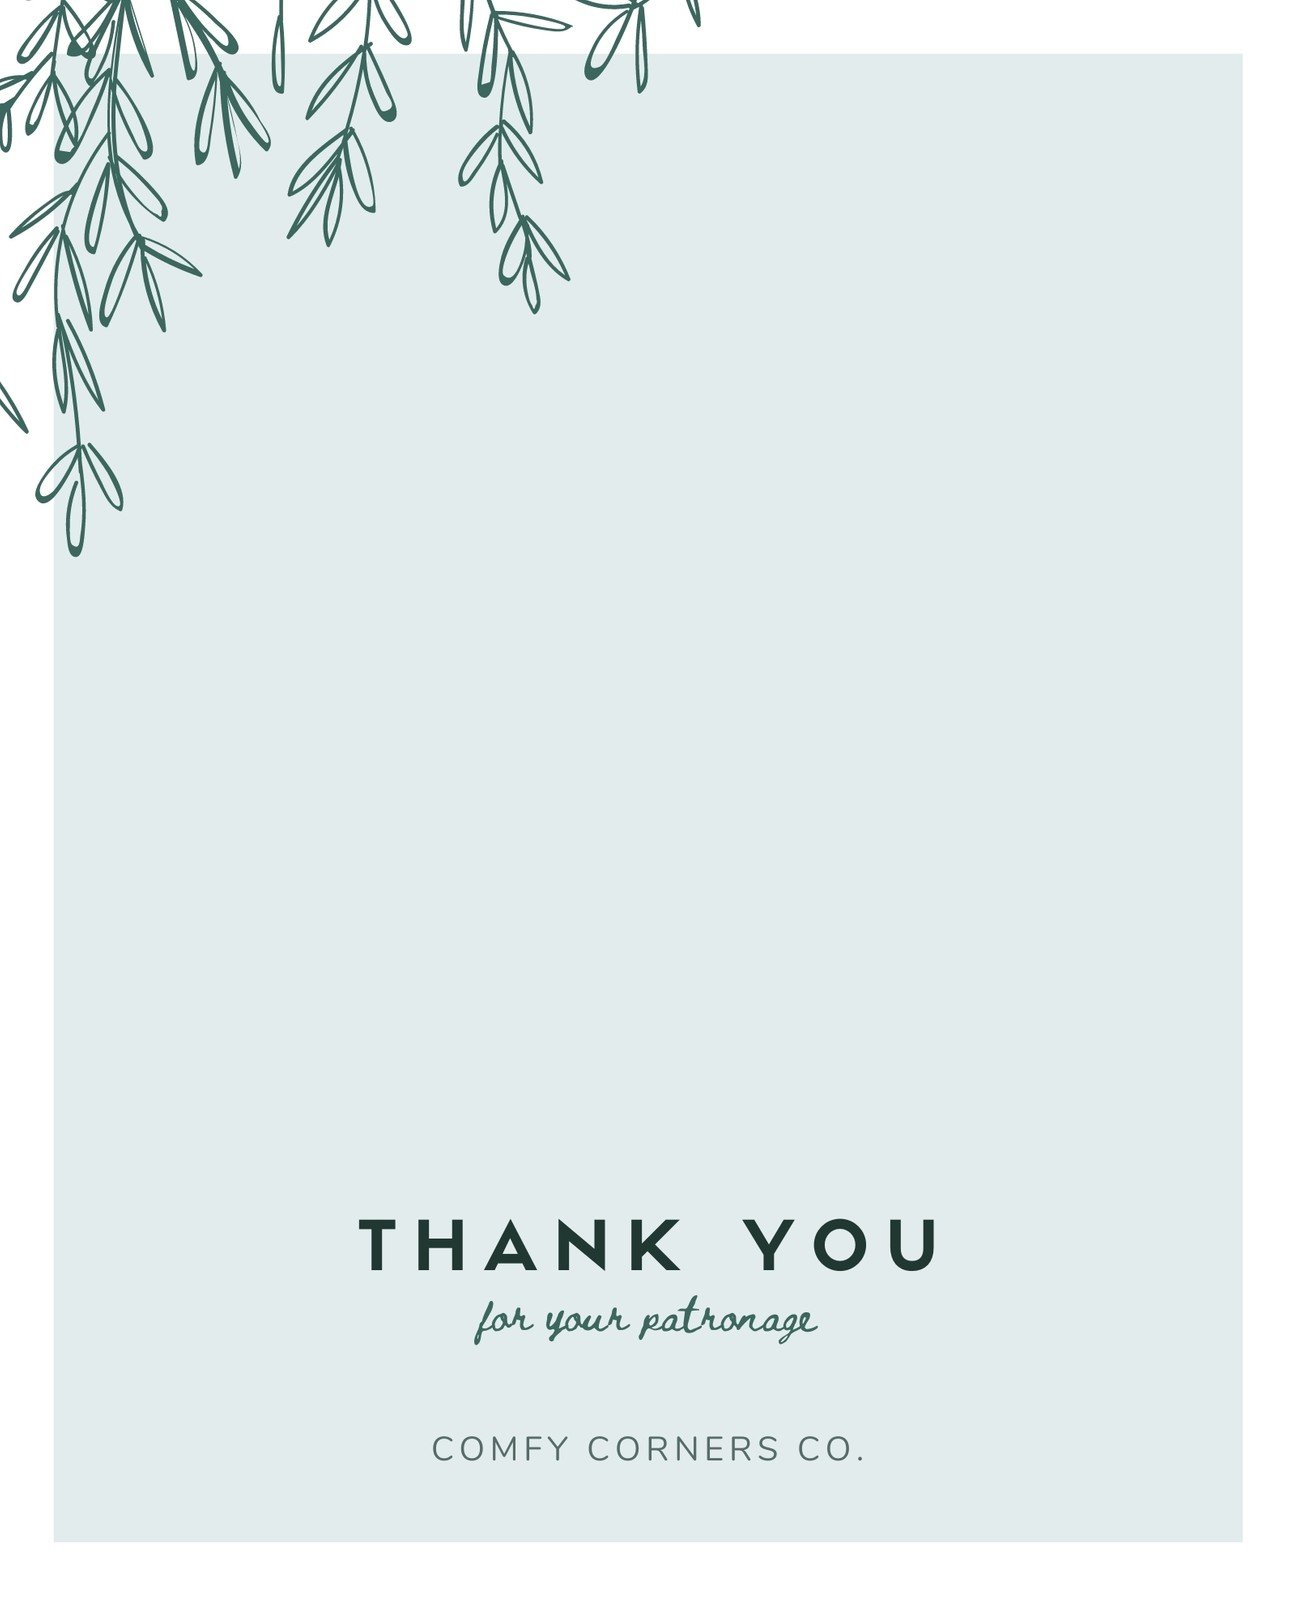 Green Vines Business Thank You Note Card - Templates by Canva Inside Thank You Note Card Template